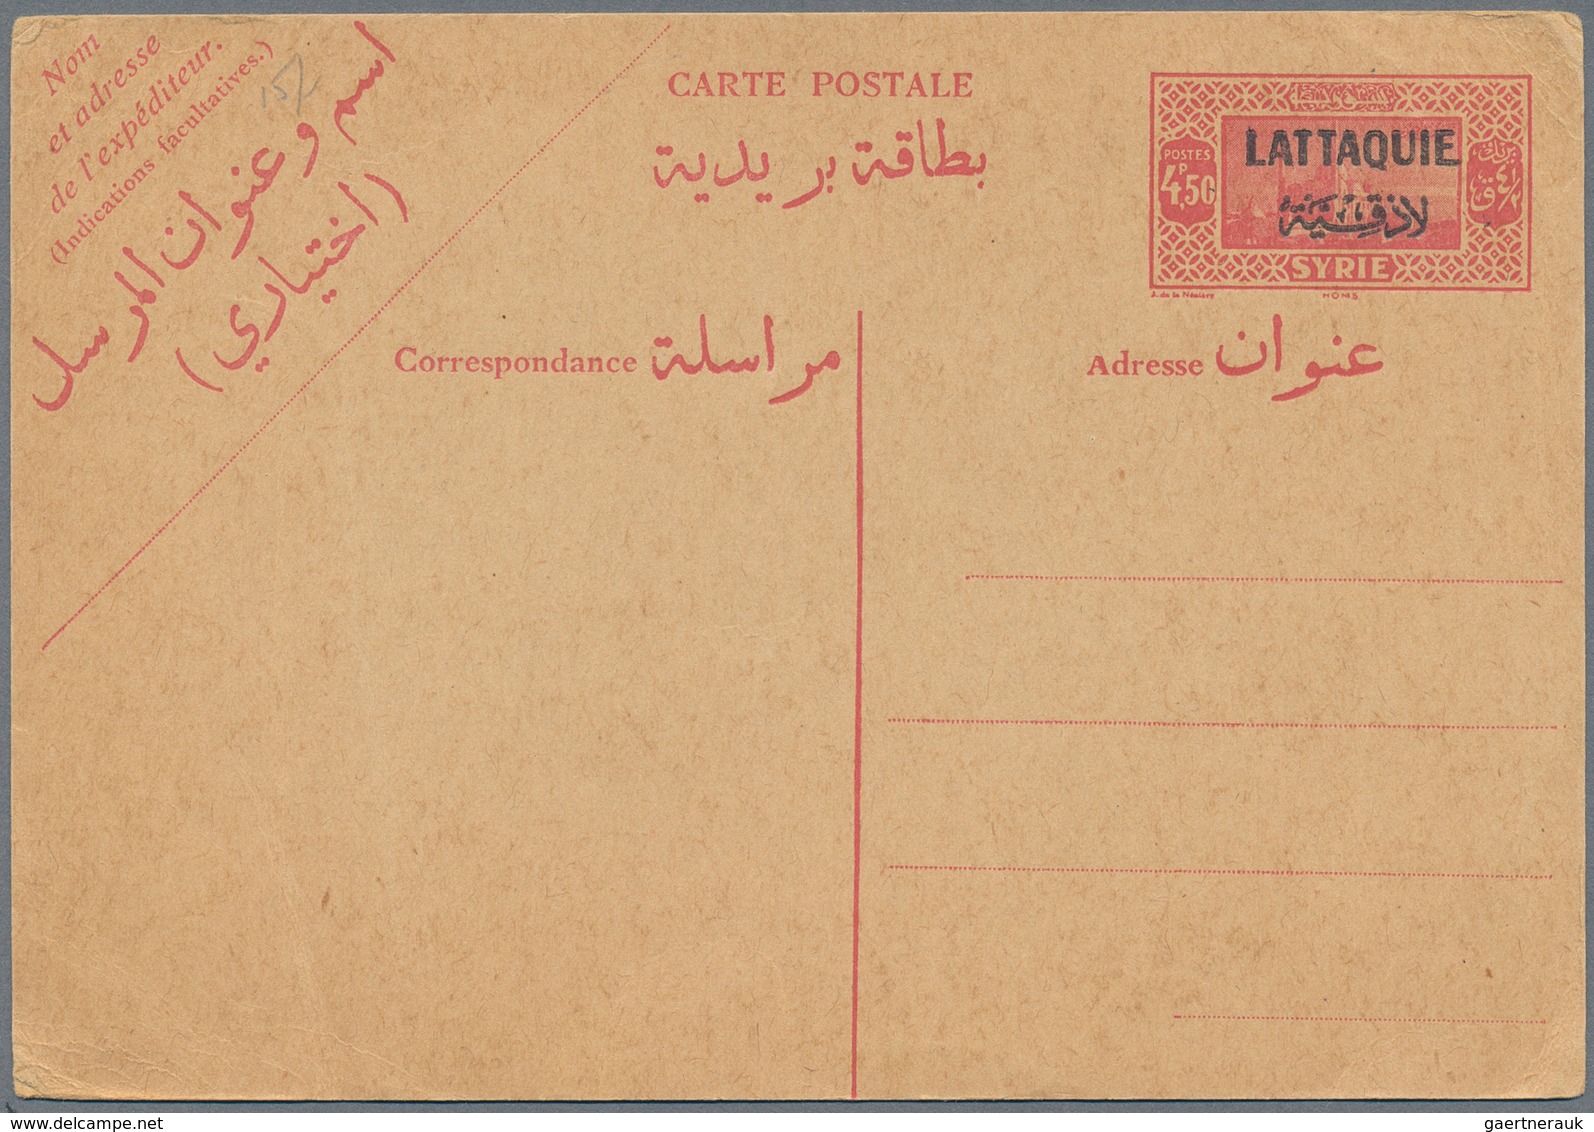 Syrien: 1917/74, collection of stationery, total 40 items: mint (29) inc. O.M.F. (9), Alexandrette (